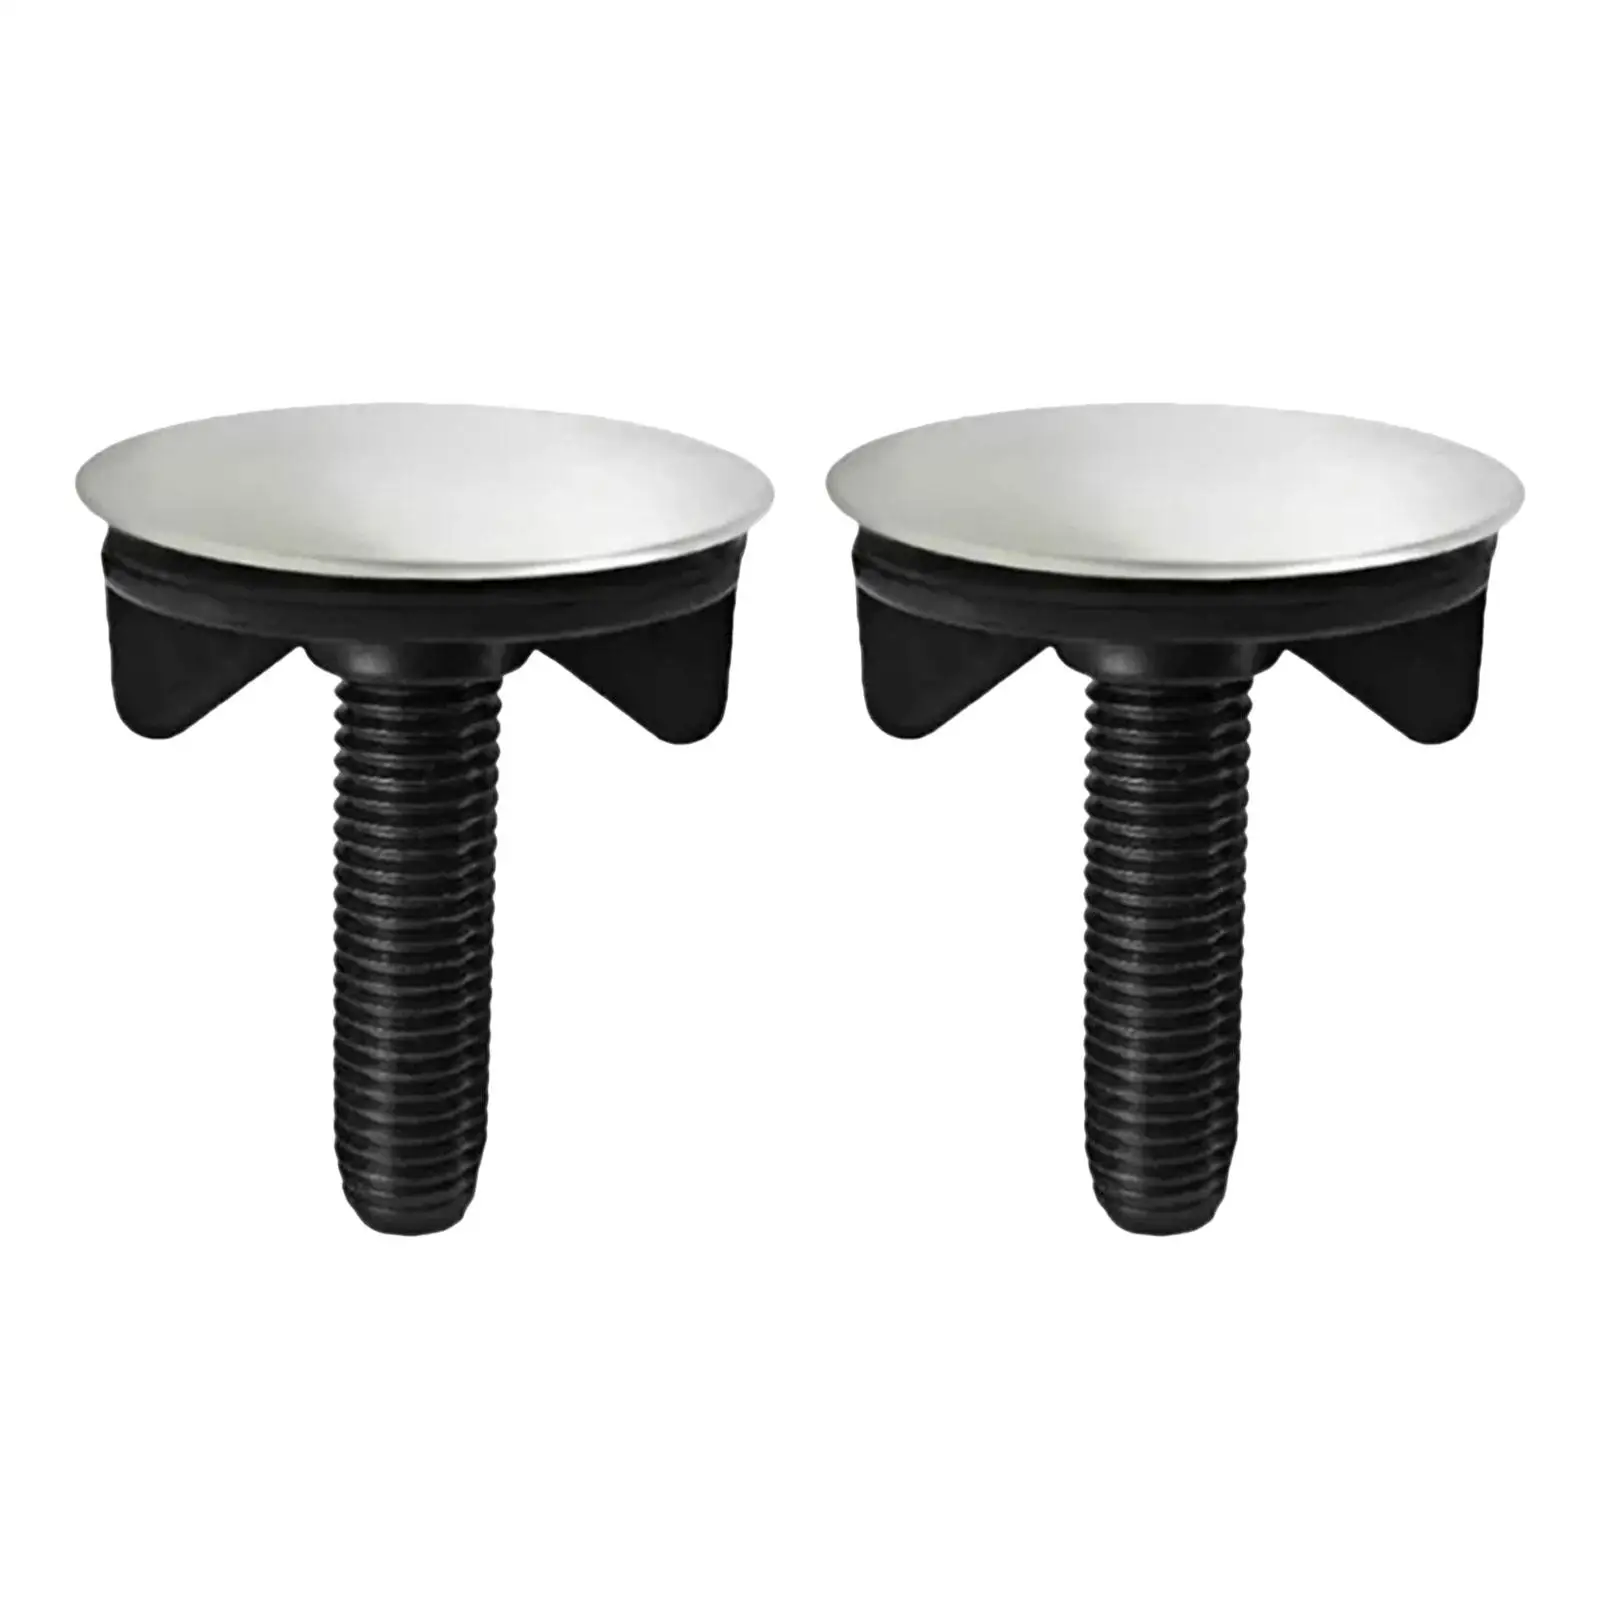 2Pcs Sink Hole Cover Durable Plate Stopper Sink Caps Sink Installation Parts Sink Tap Hole Plug for Bathroom Basin Sink Kitchen